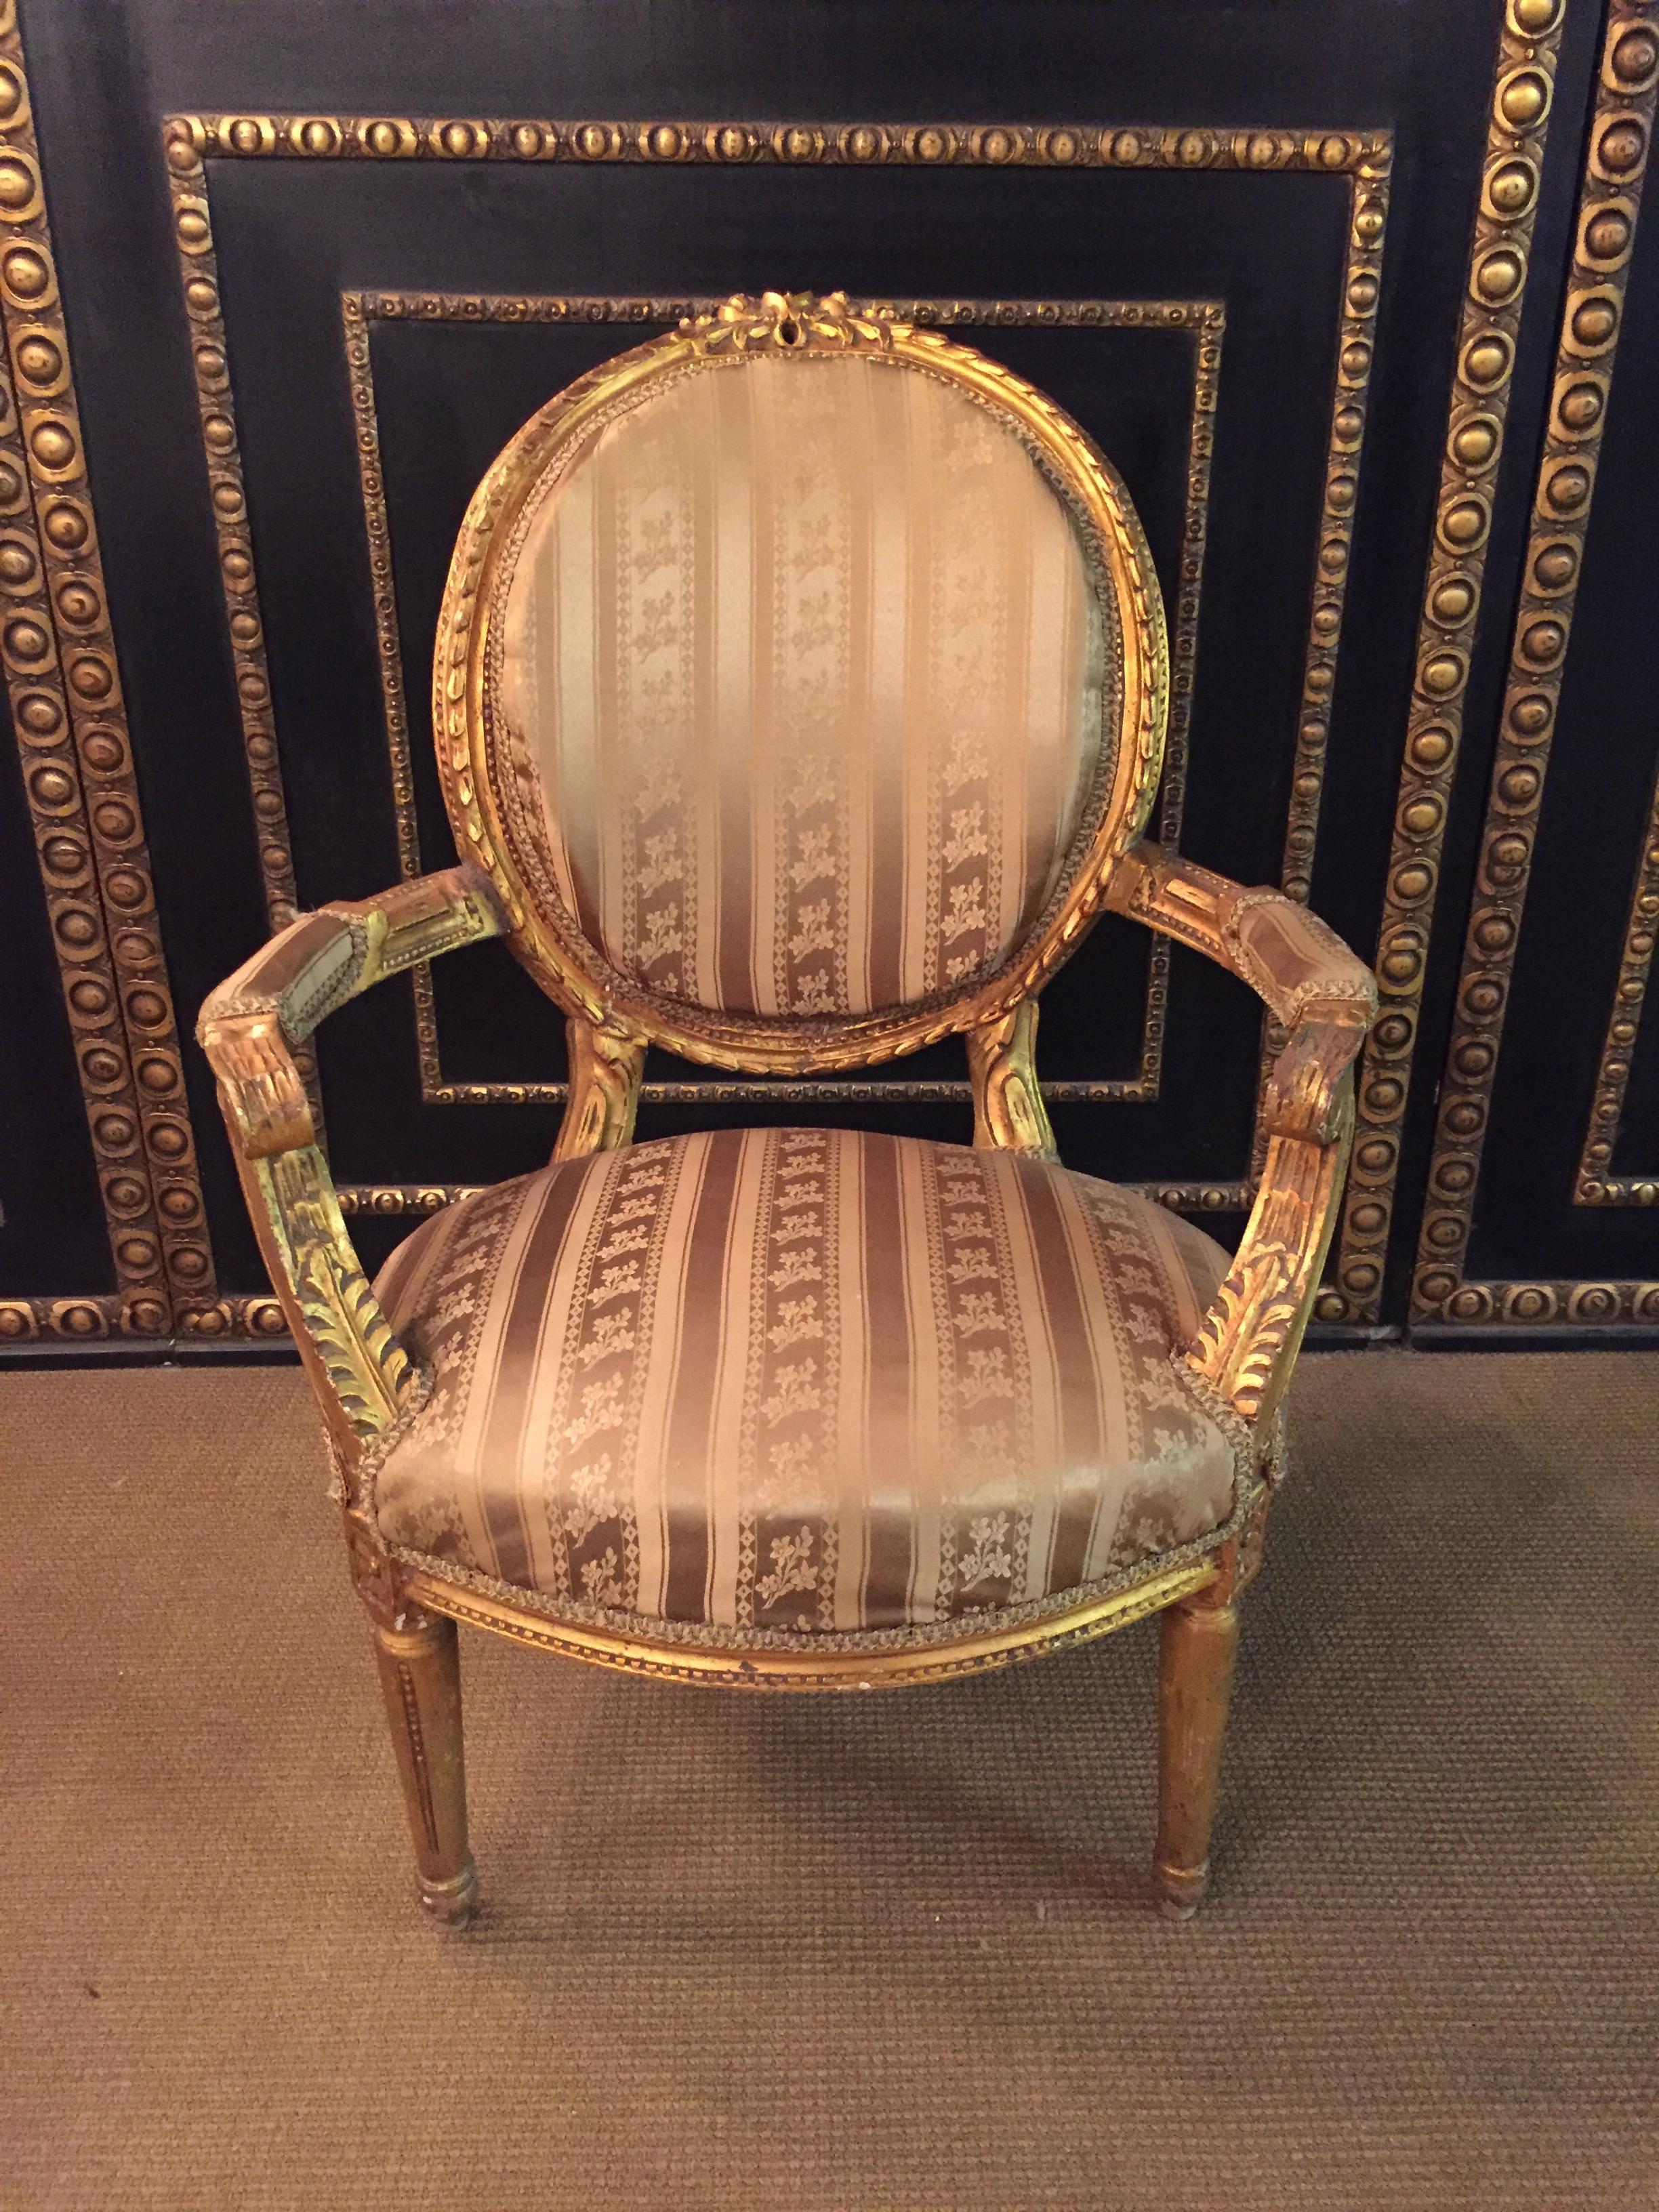 Solid beech wood, set and gilded. Cambered and carved frame on fluted, pointed legs. Curly armrests. Straight supports with applied acanthus leaves. Rising armrests in oval back frame ending in carved Rocaillenbekrönung. Seat and backrest are